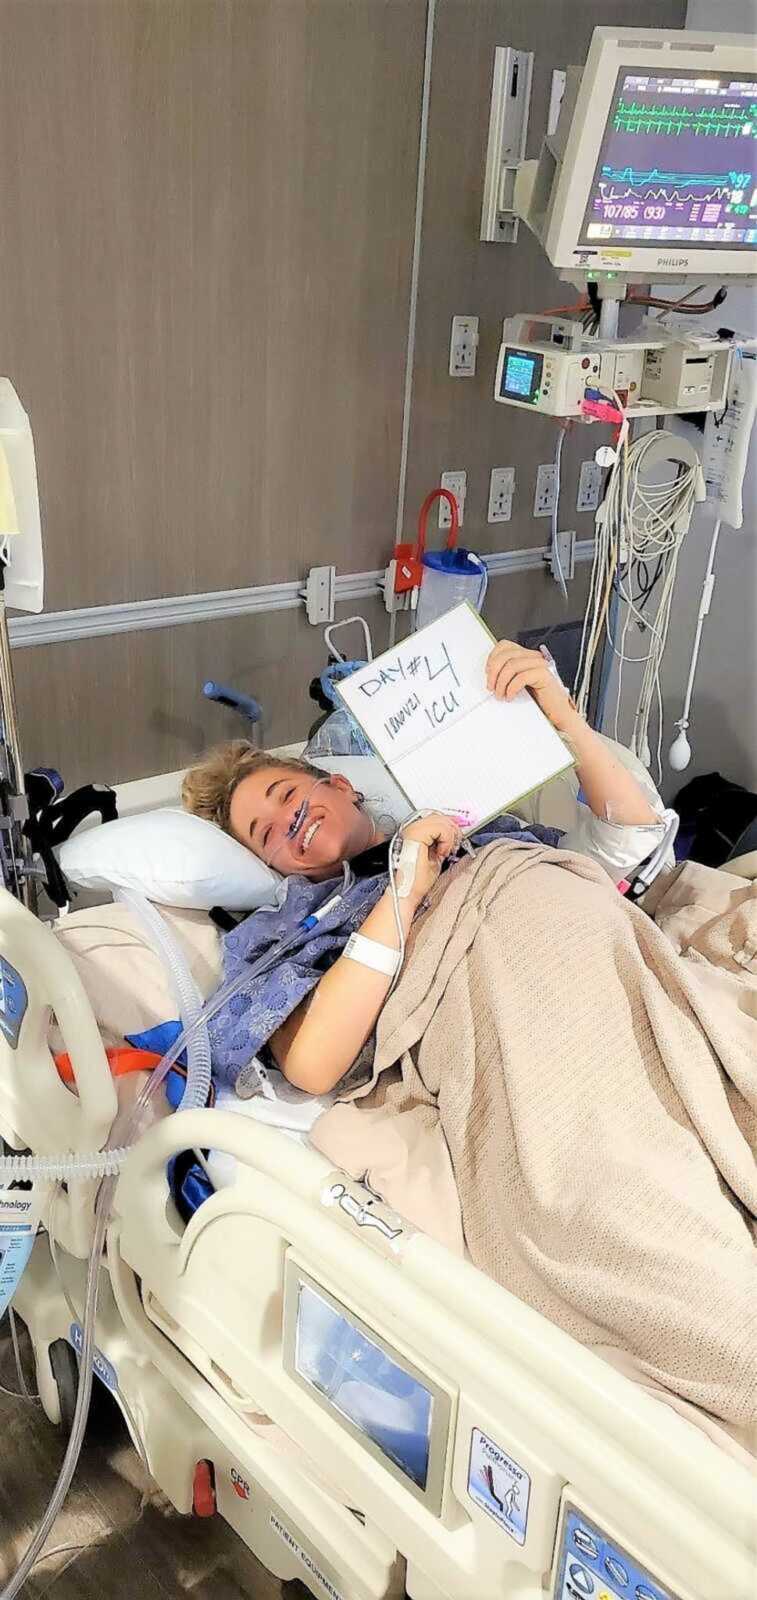 woman laying in a hospital bed with sign that says "DAY 4 ICU"